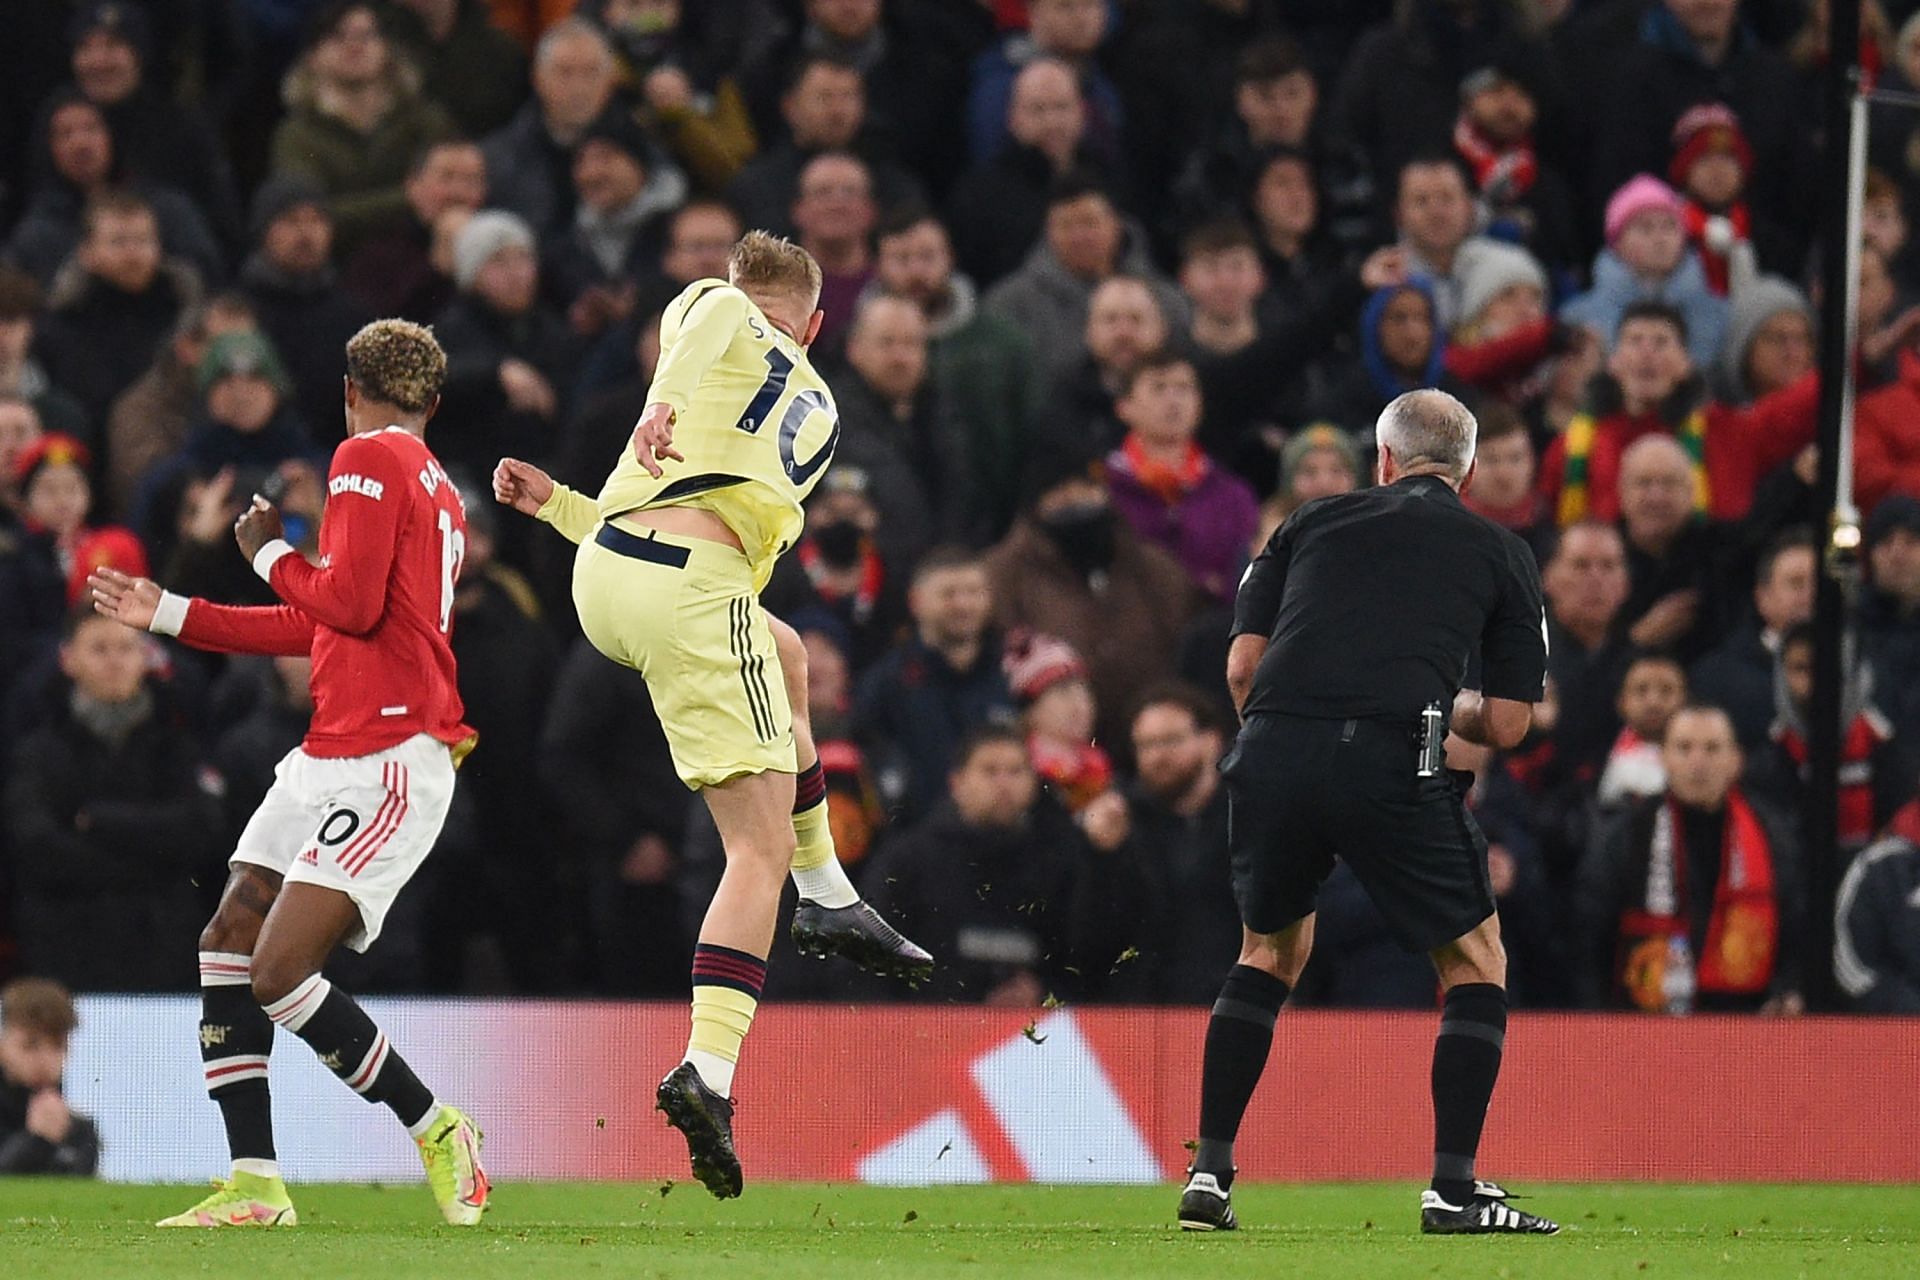 Arsenal fell to a 3-2 defeat at the hands of Manchester United